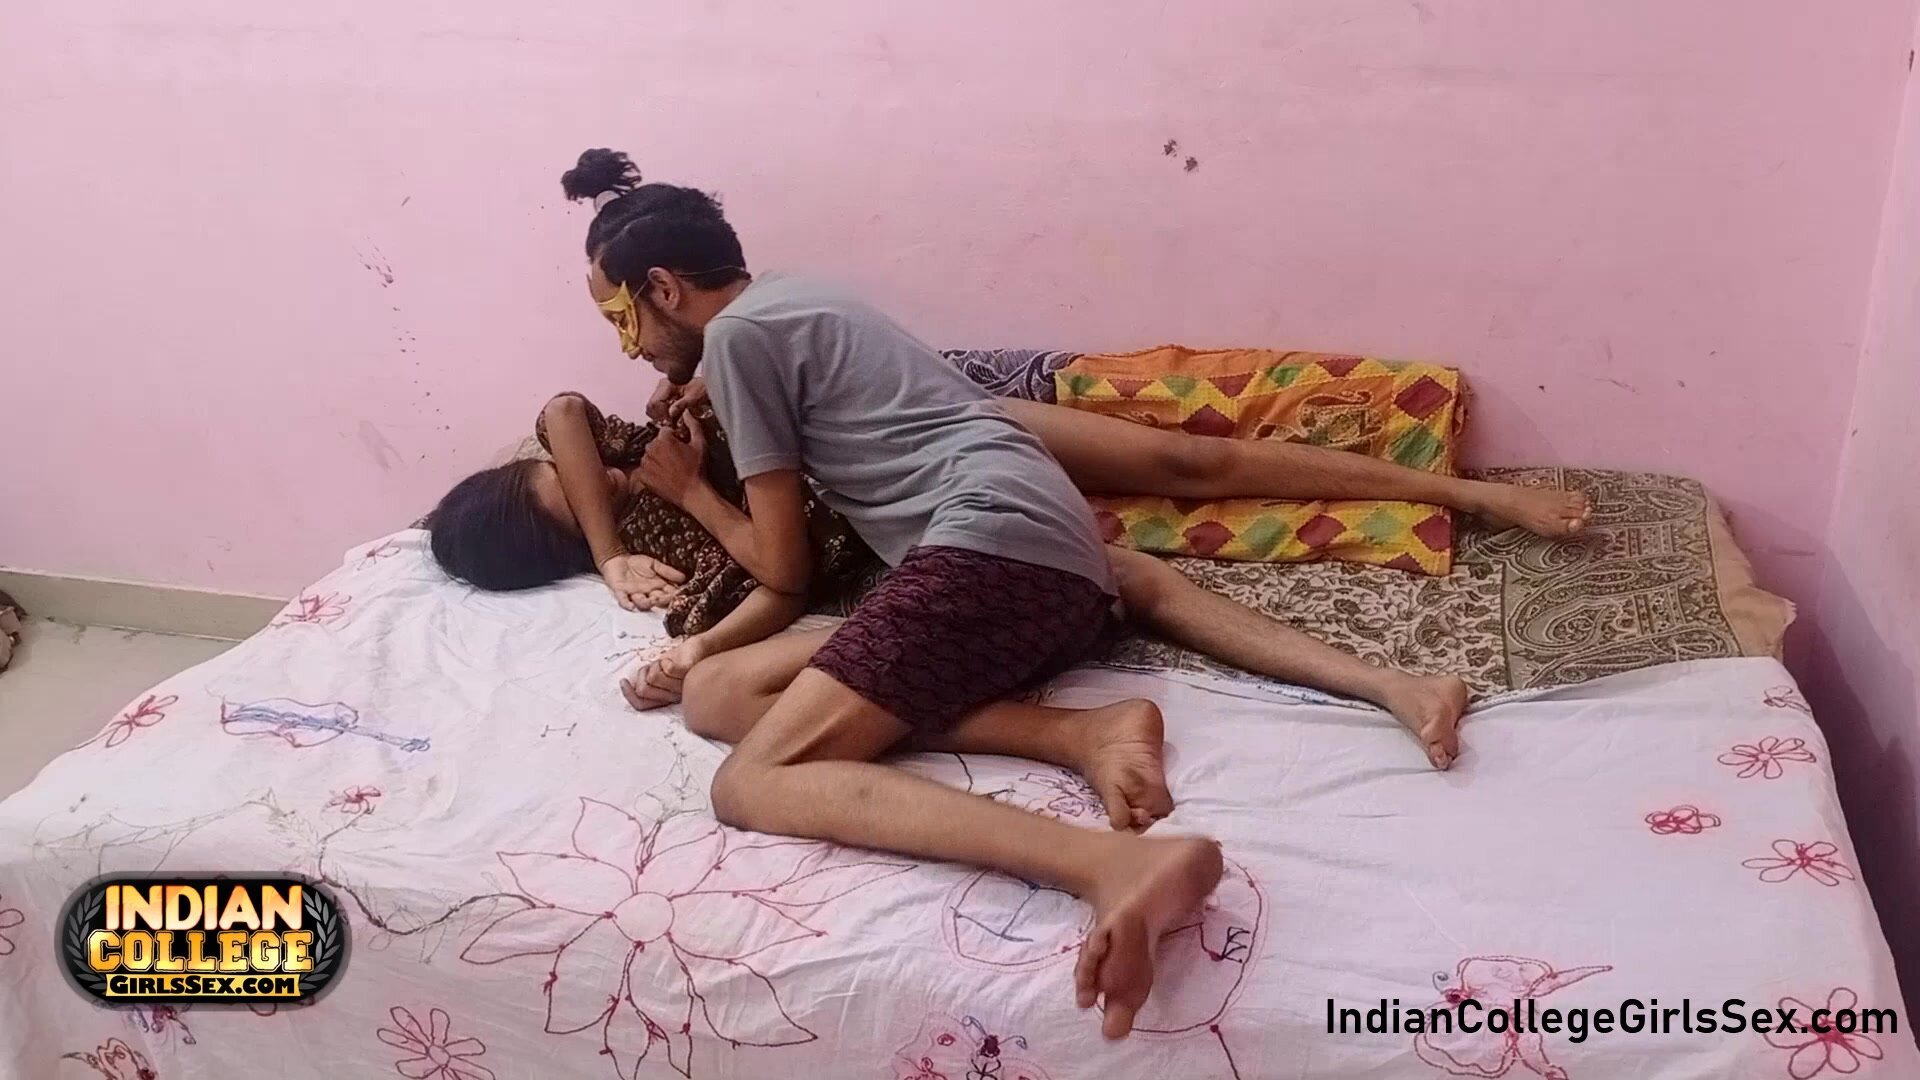 Amateur Indian skinny teen get an anal creampie after a hard desi pussy fucking sex at Fapnado pic